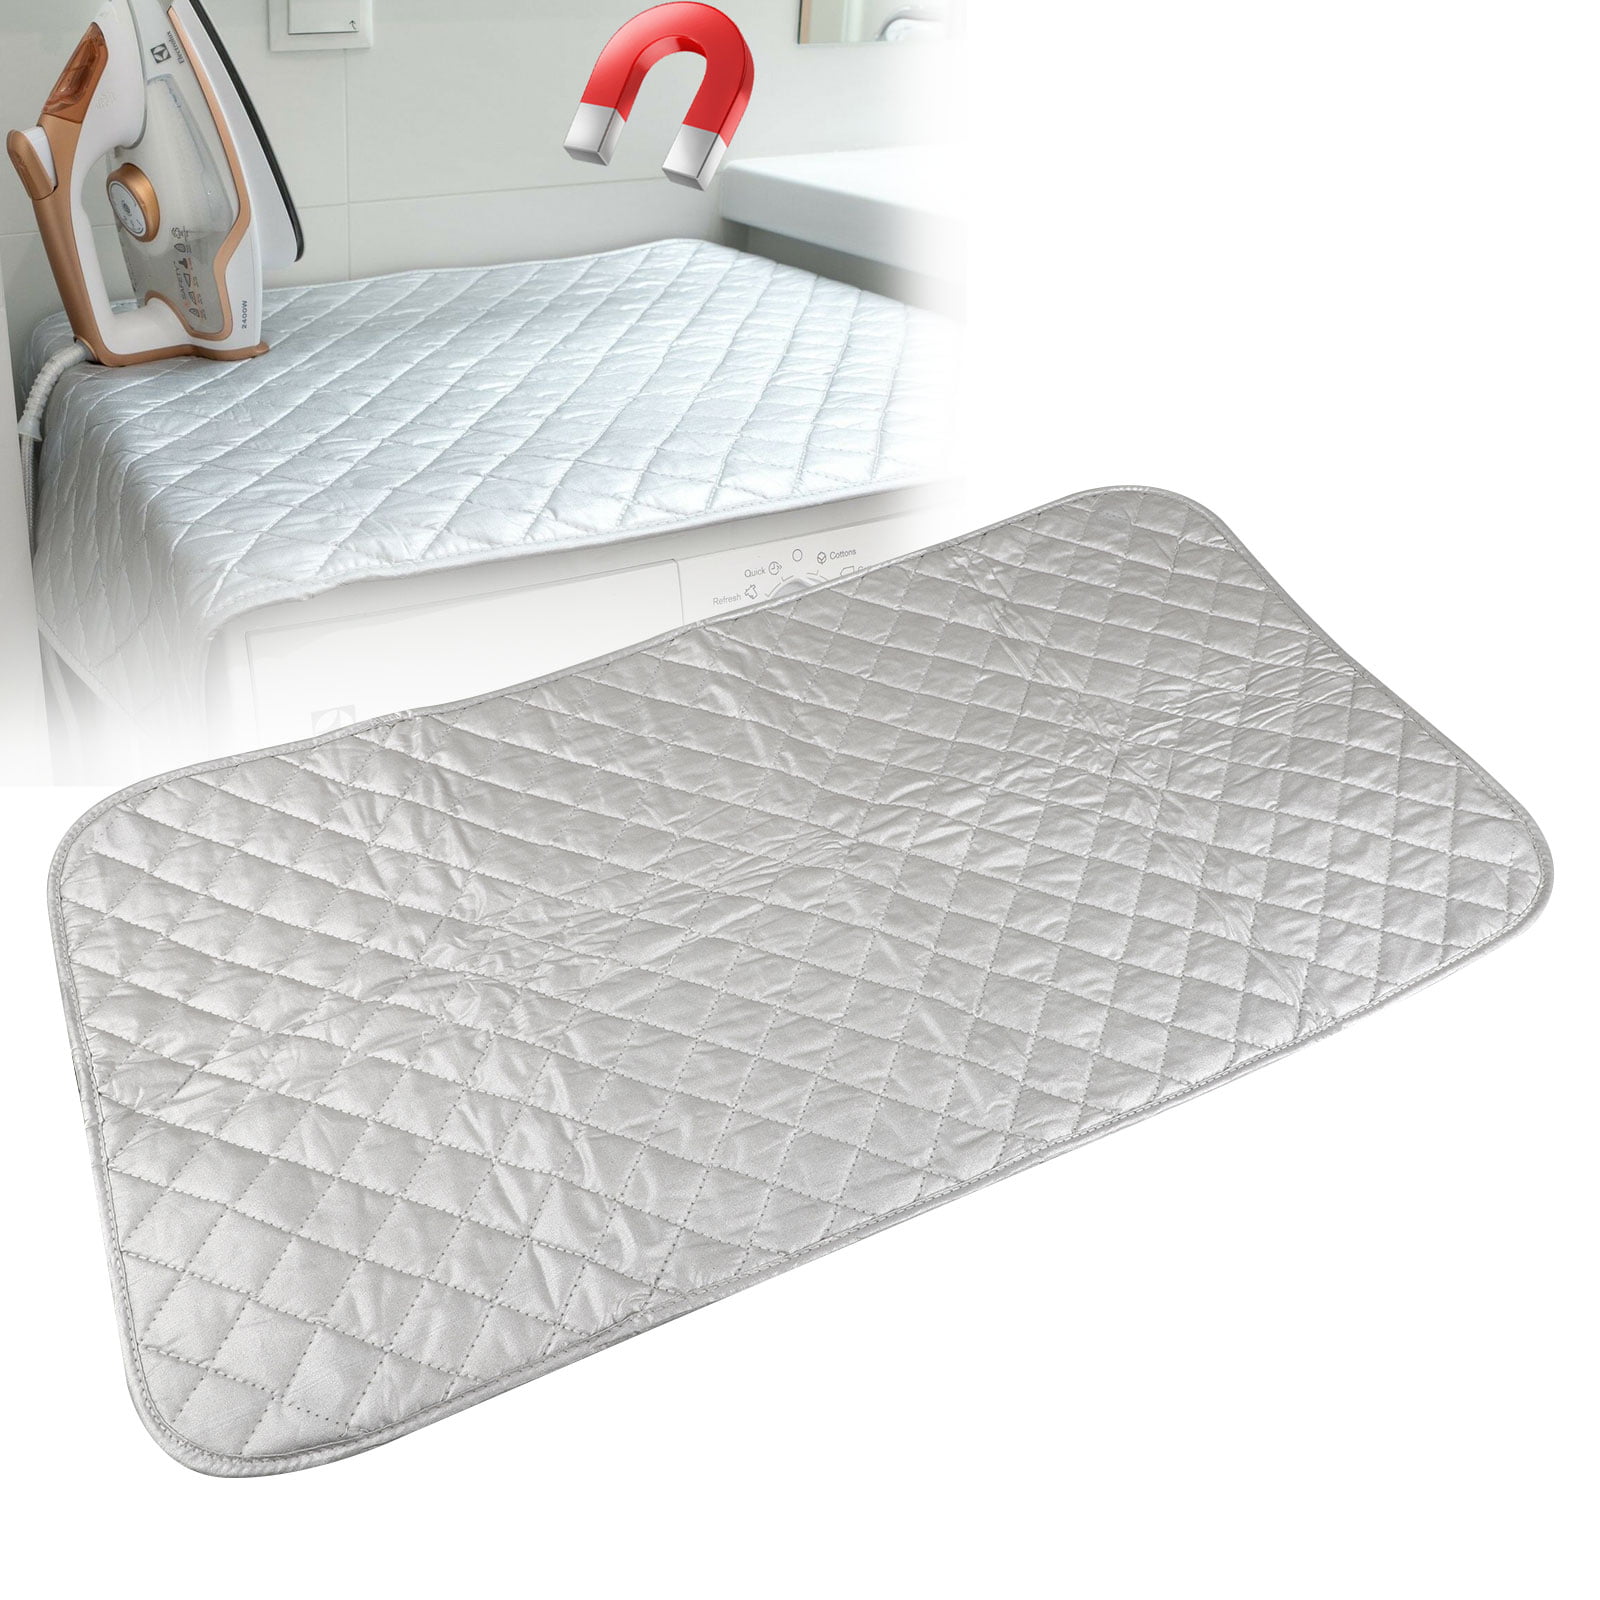 Household Ironing Pad Solid Travel Portable Surface Protect Board Cover Mat KI 